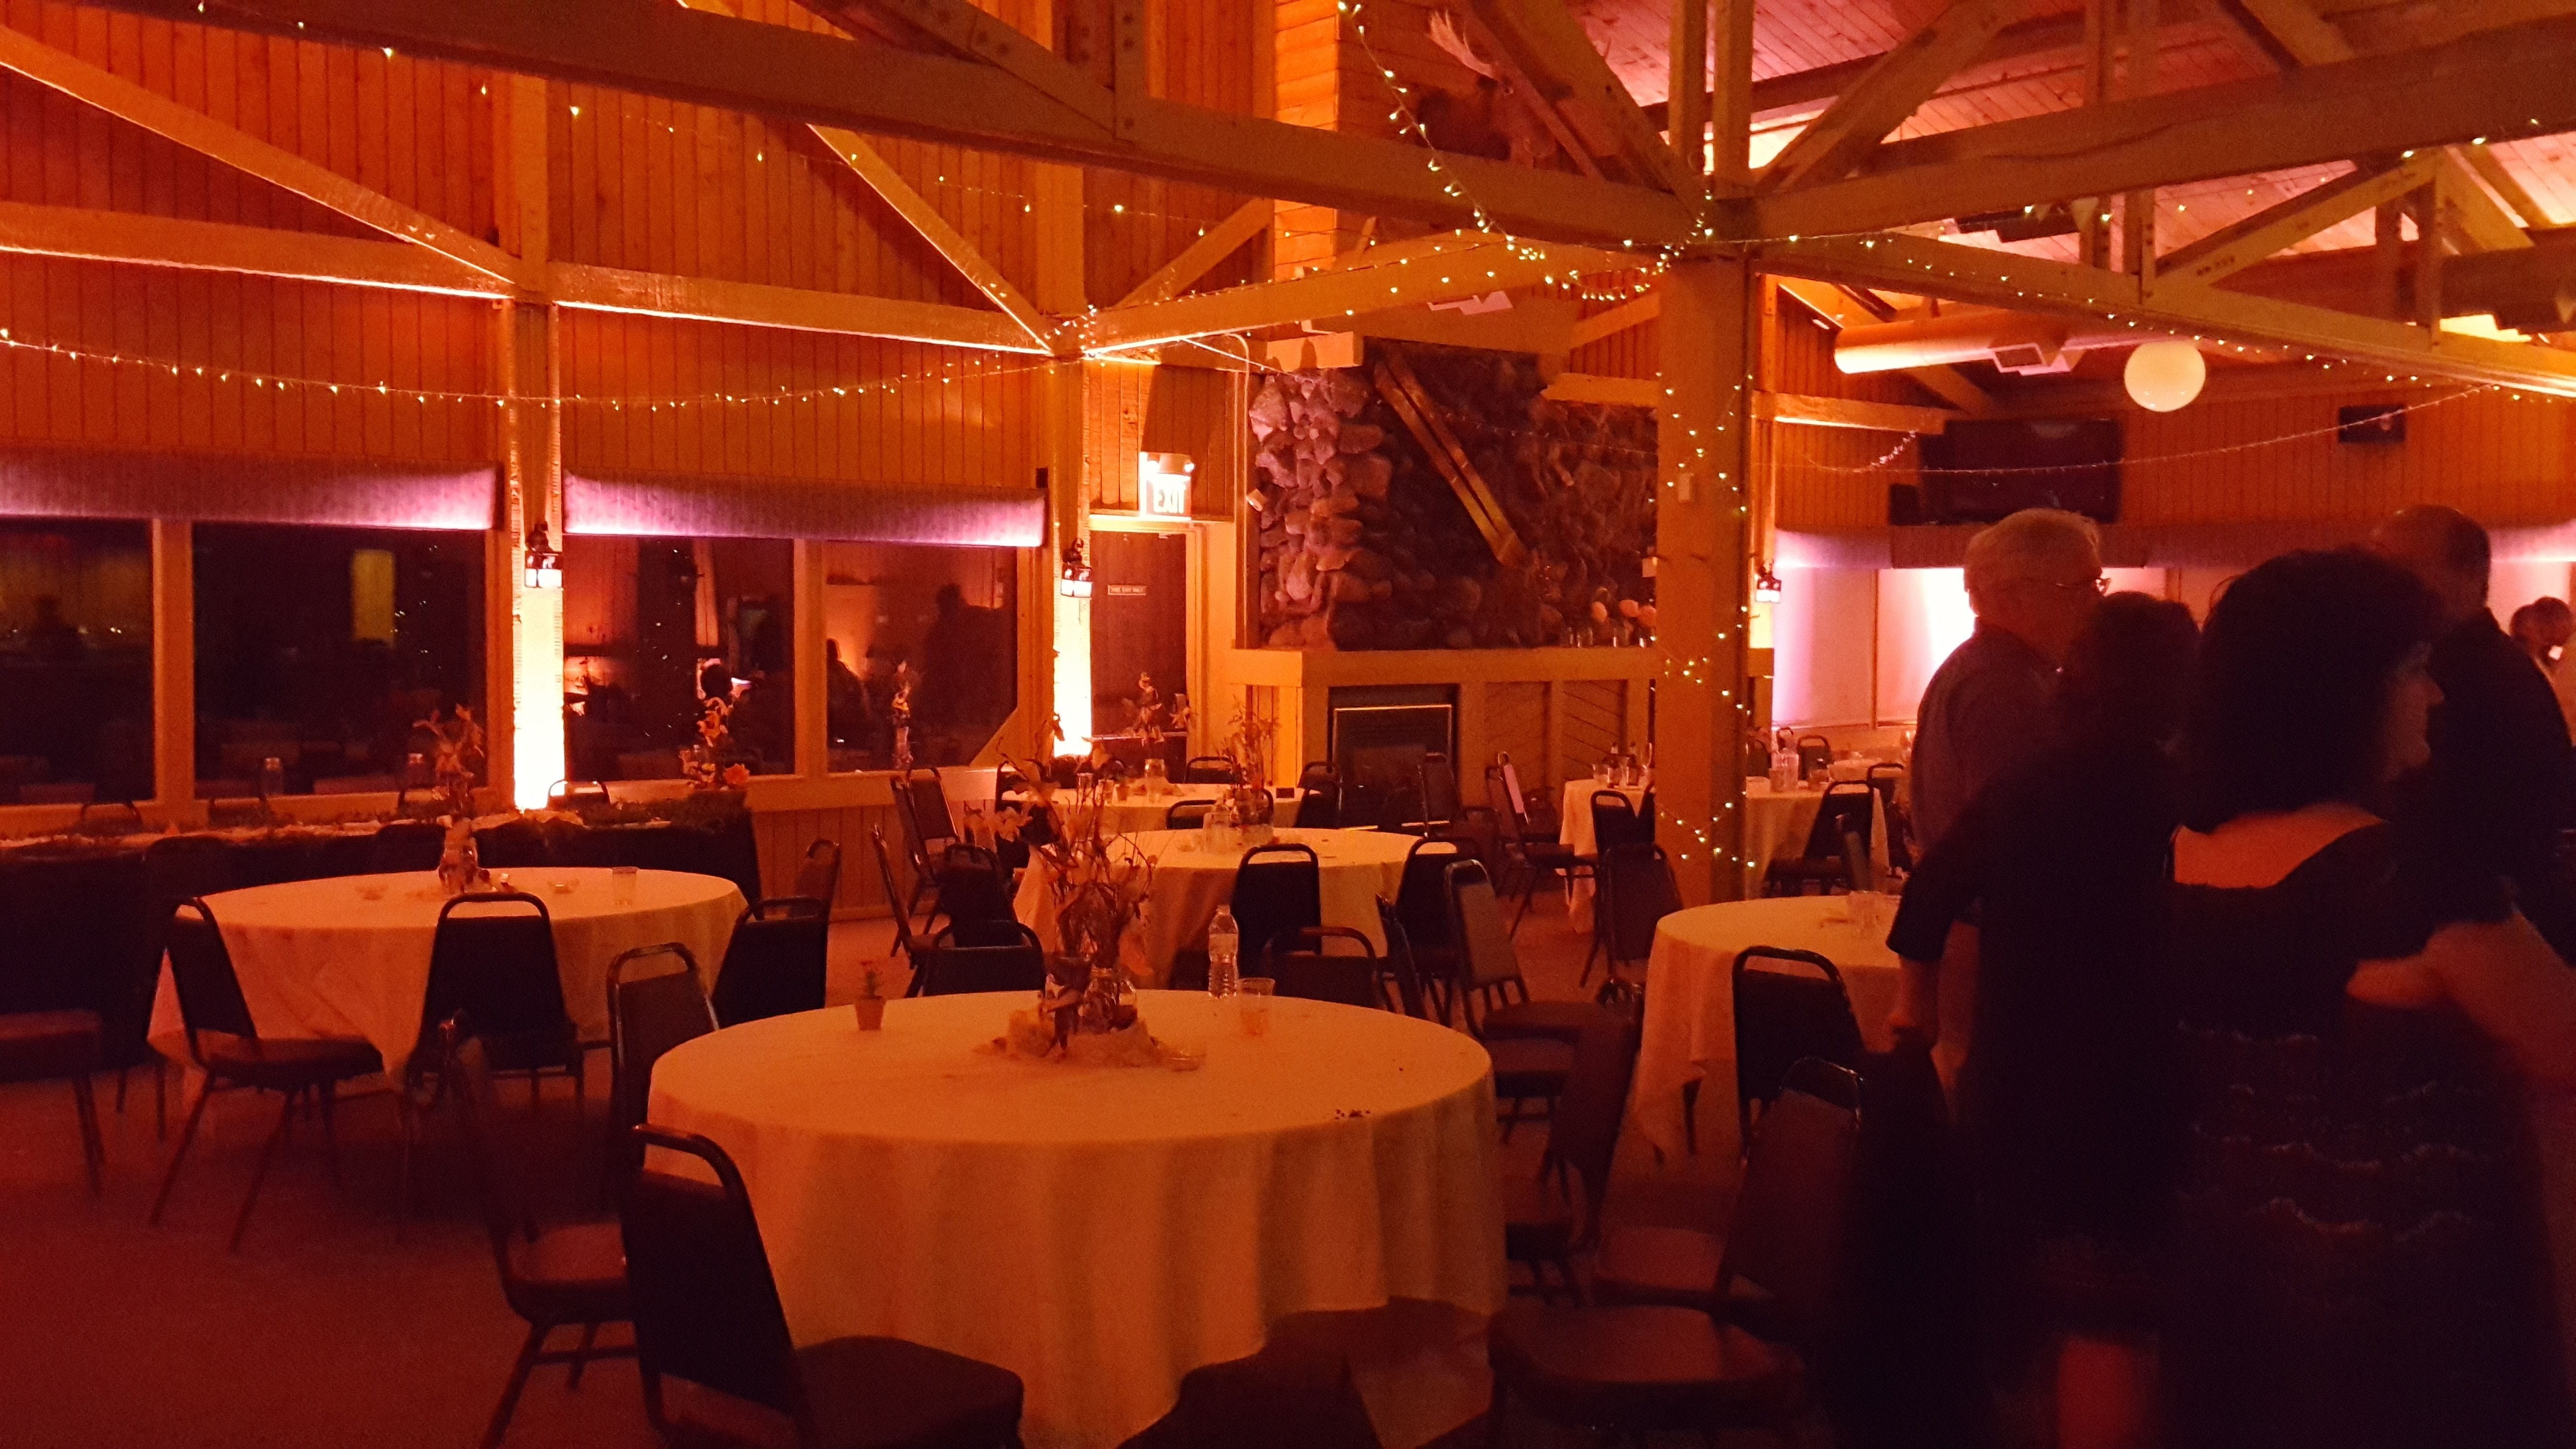 Moose Head Room at Spirit Mountian. Wedding lighting in a peach/coral